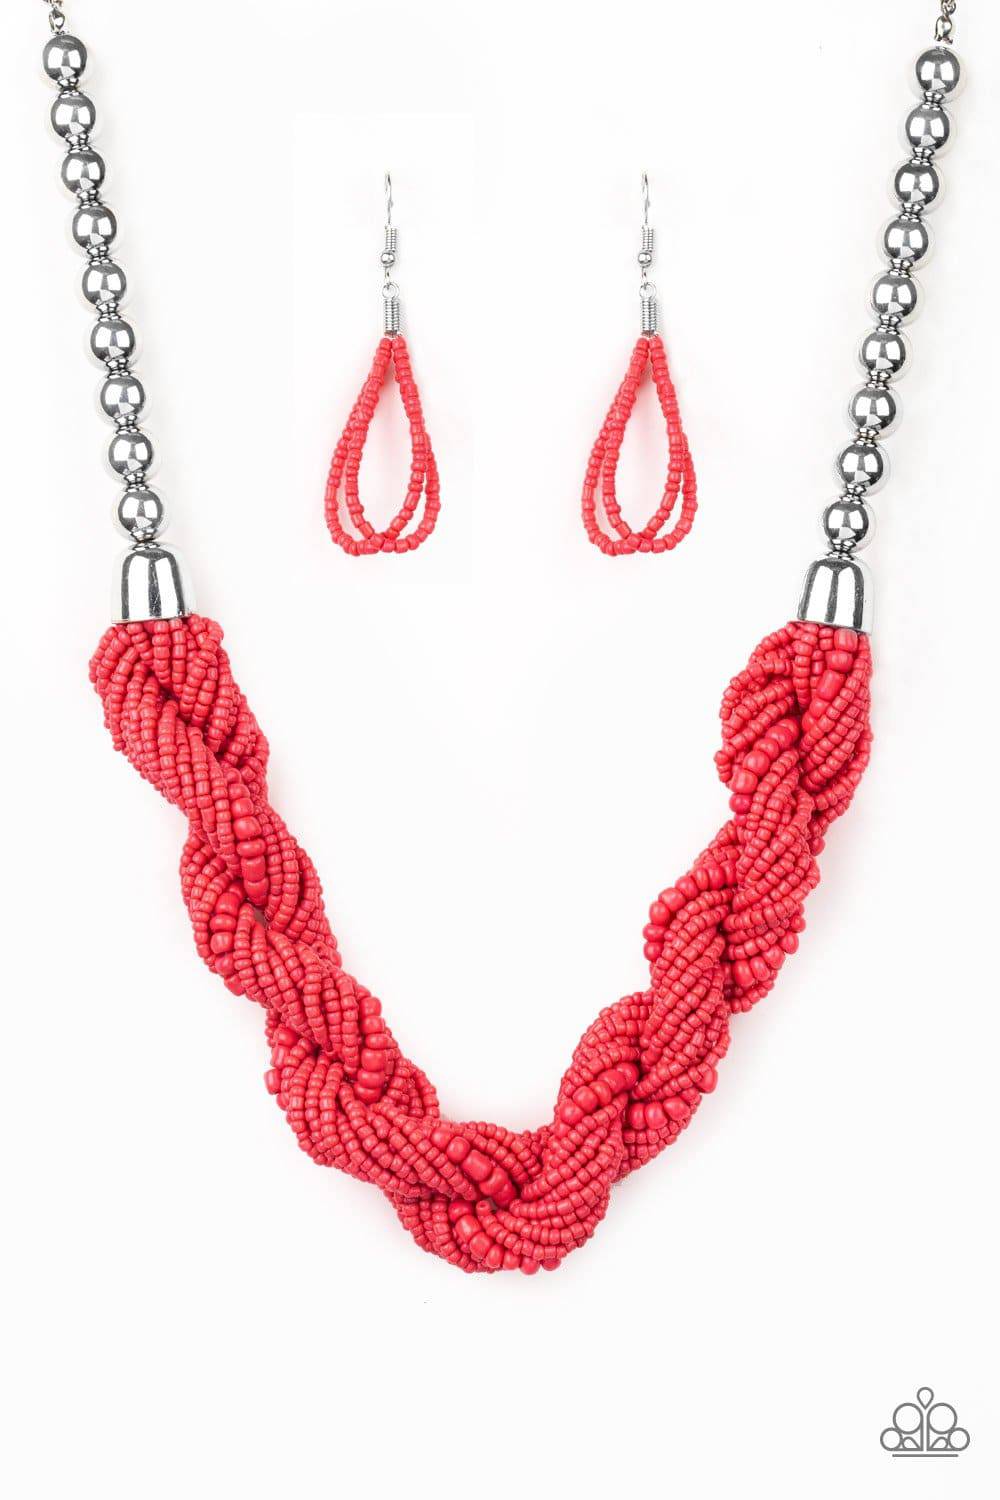 Savannah Surfin - Living Coral Seed Bead Necklace -Paparazzi Accessories - GlaMarous Titi Jewels